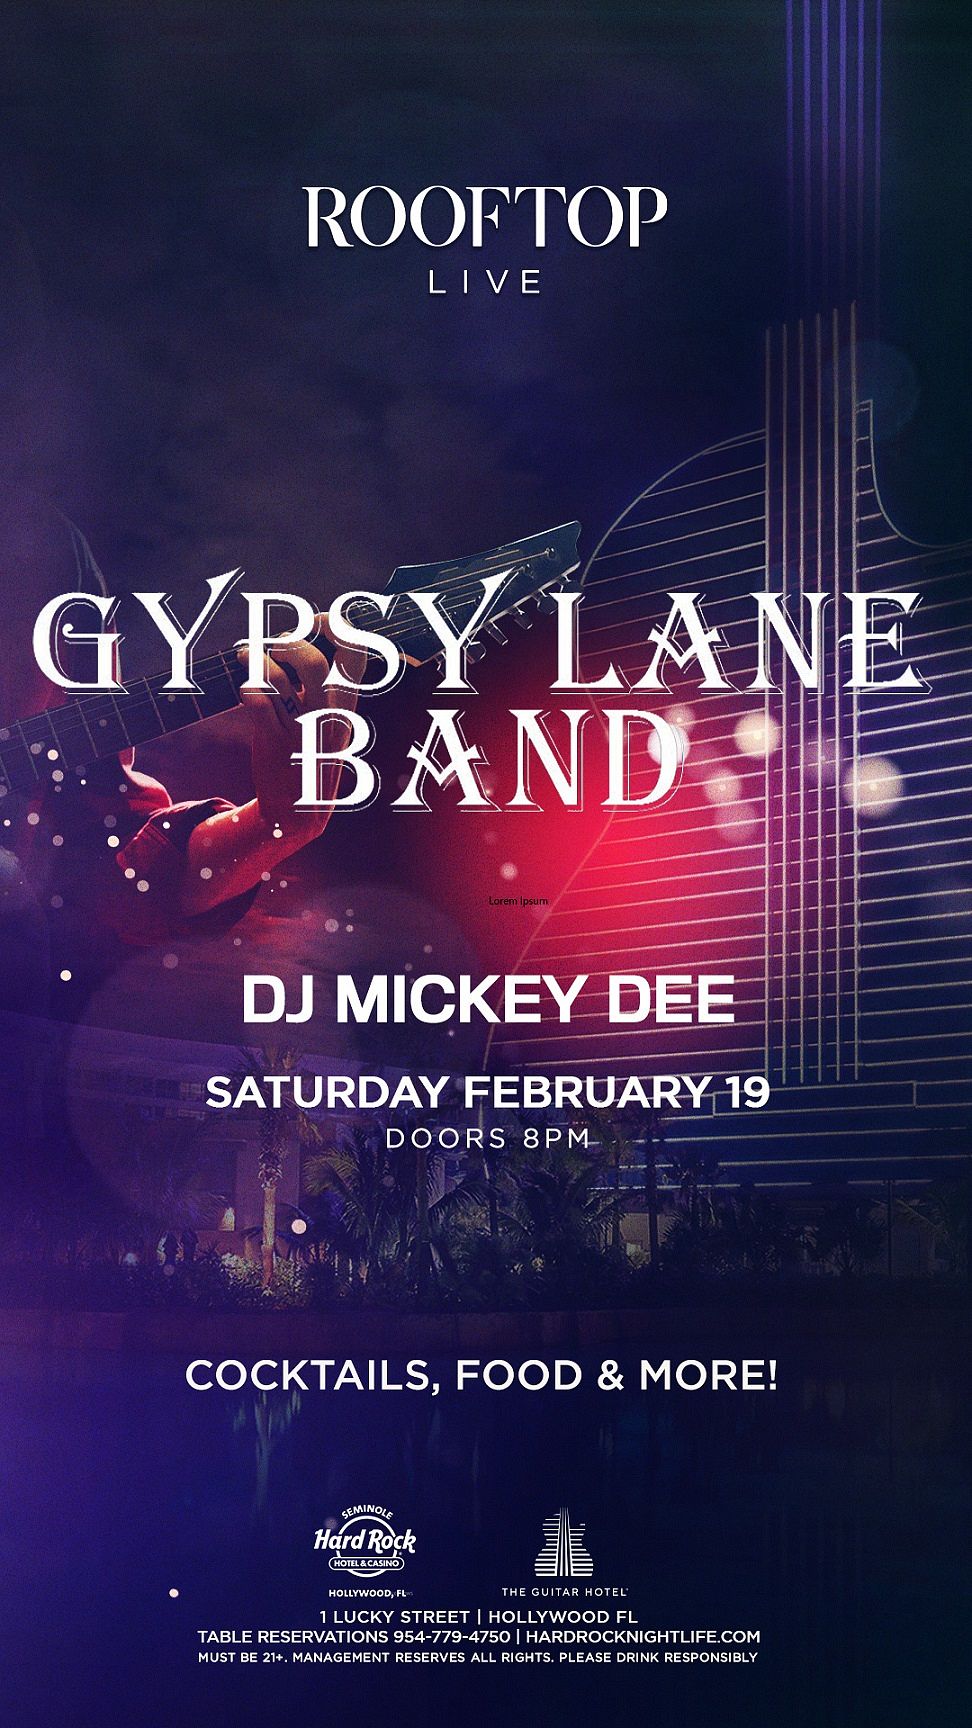 Gypsy Lane Band Tickets at Rooftop Live in Hollywood by Rooftop Live Tixr